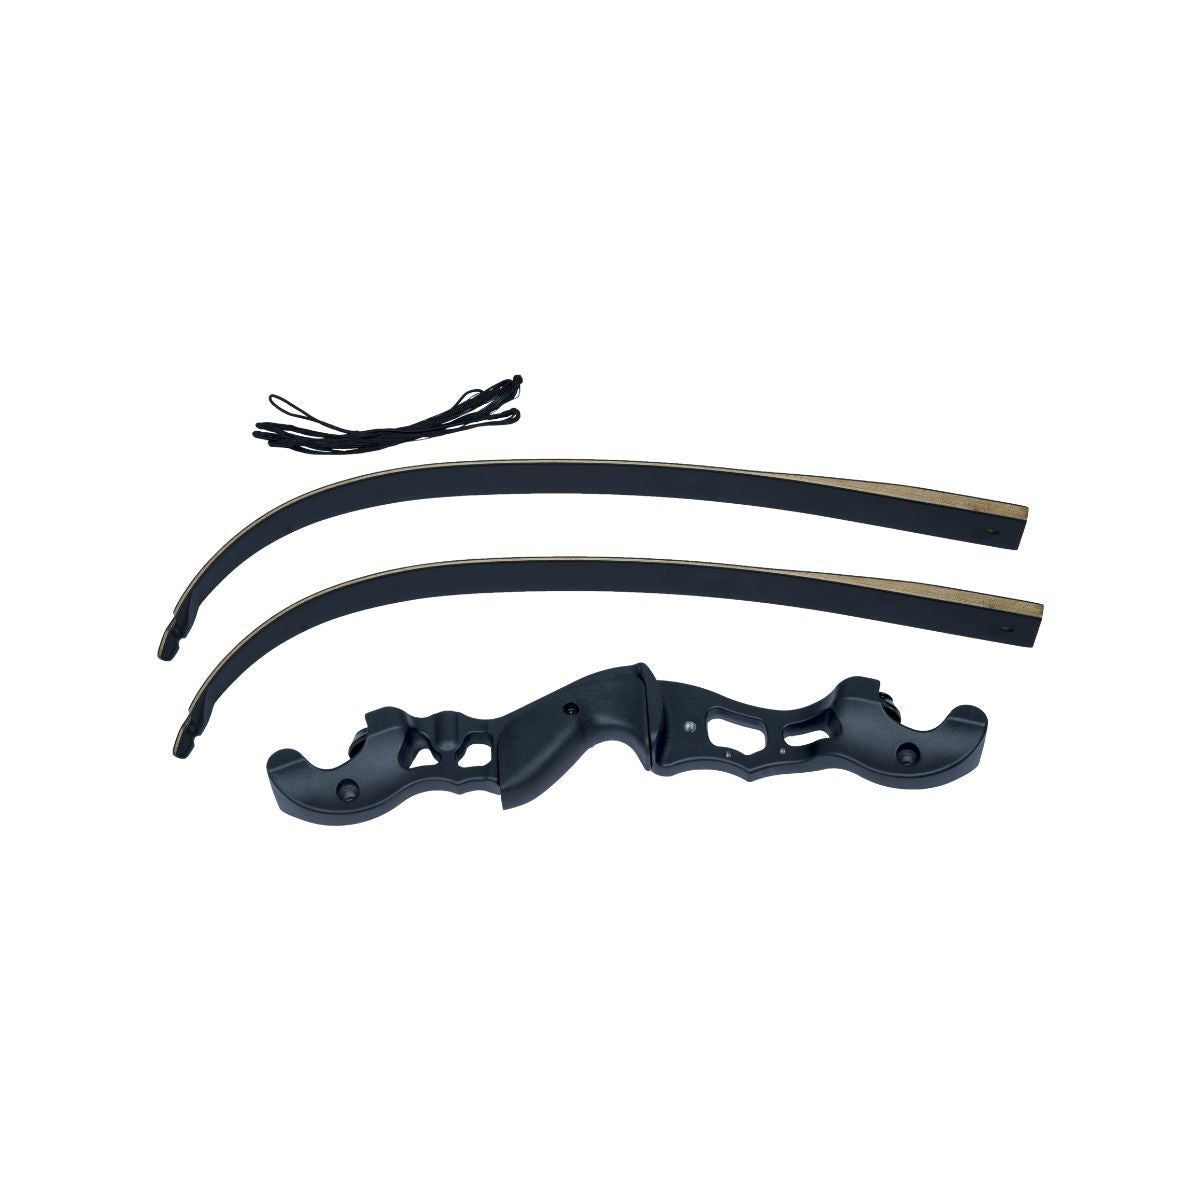 Brute Re-Curve Bow - AB-R185 4